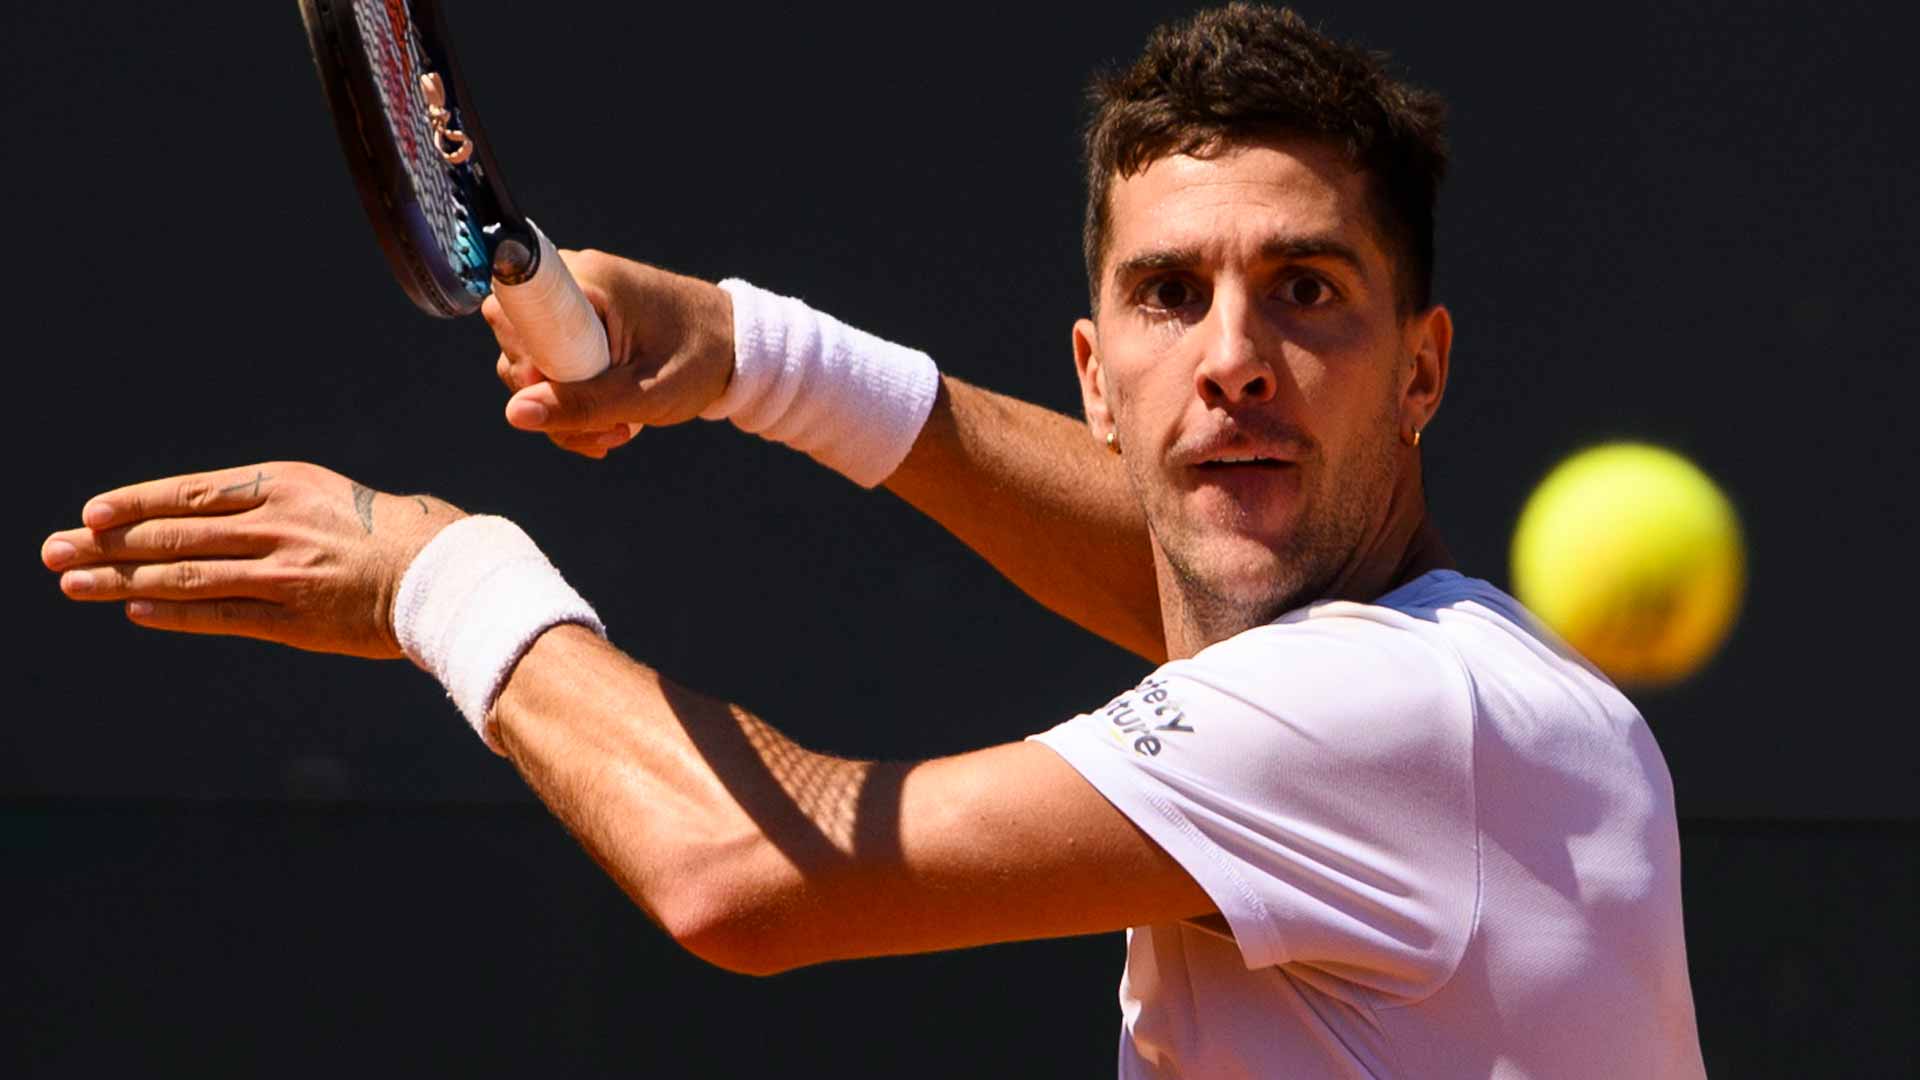 Thanasi Kokkinakis will try to reach the main draw at Wimbledon through qualifying for the first time.